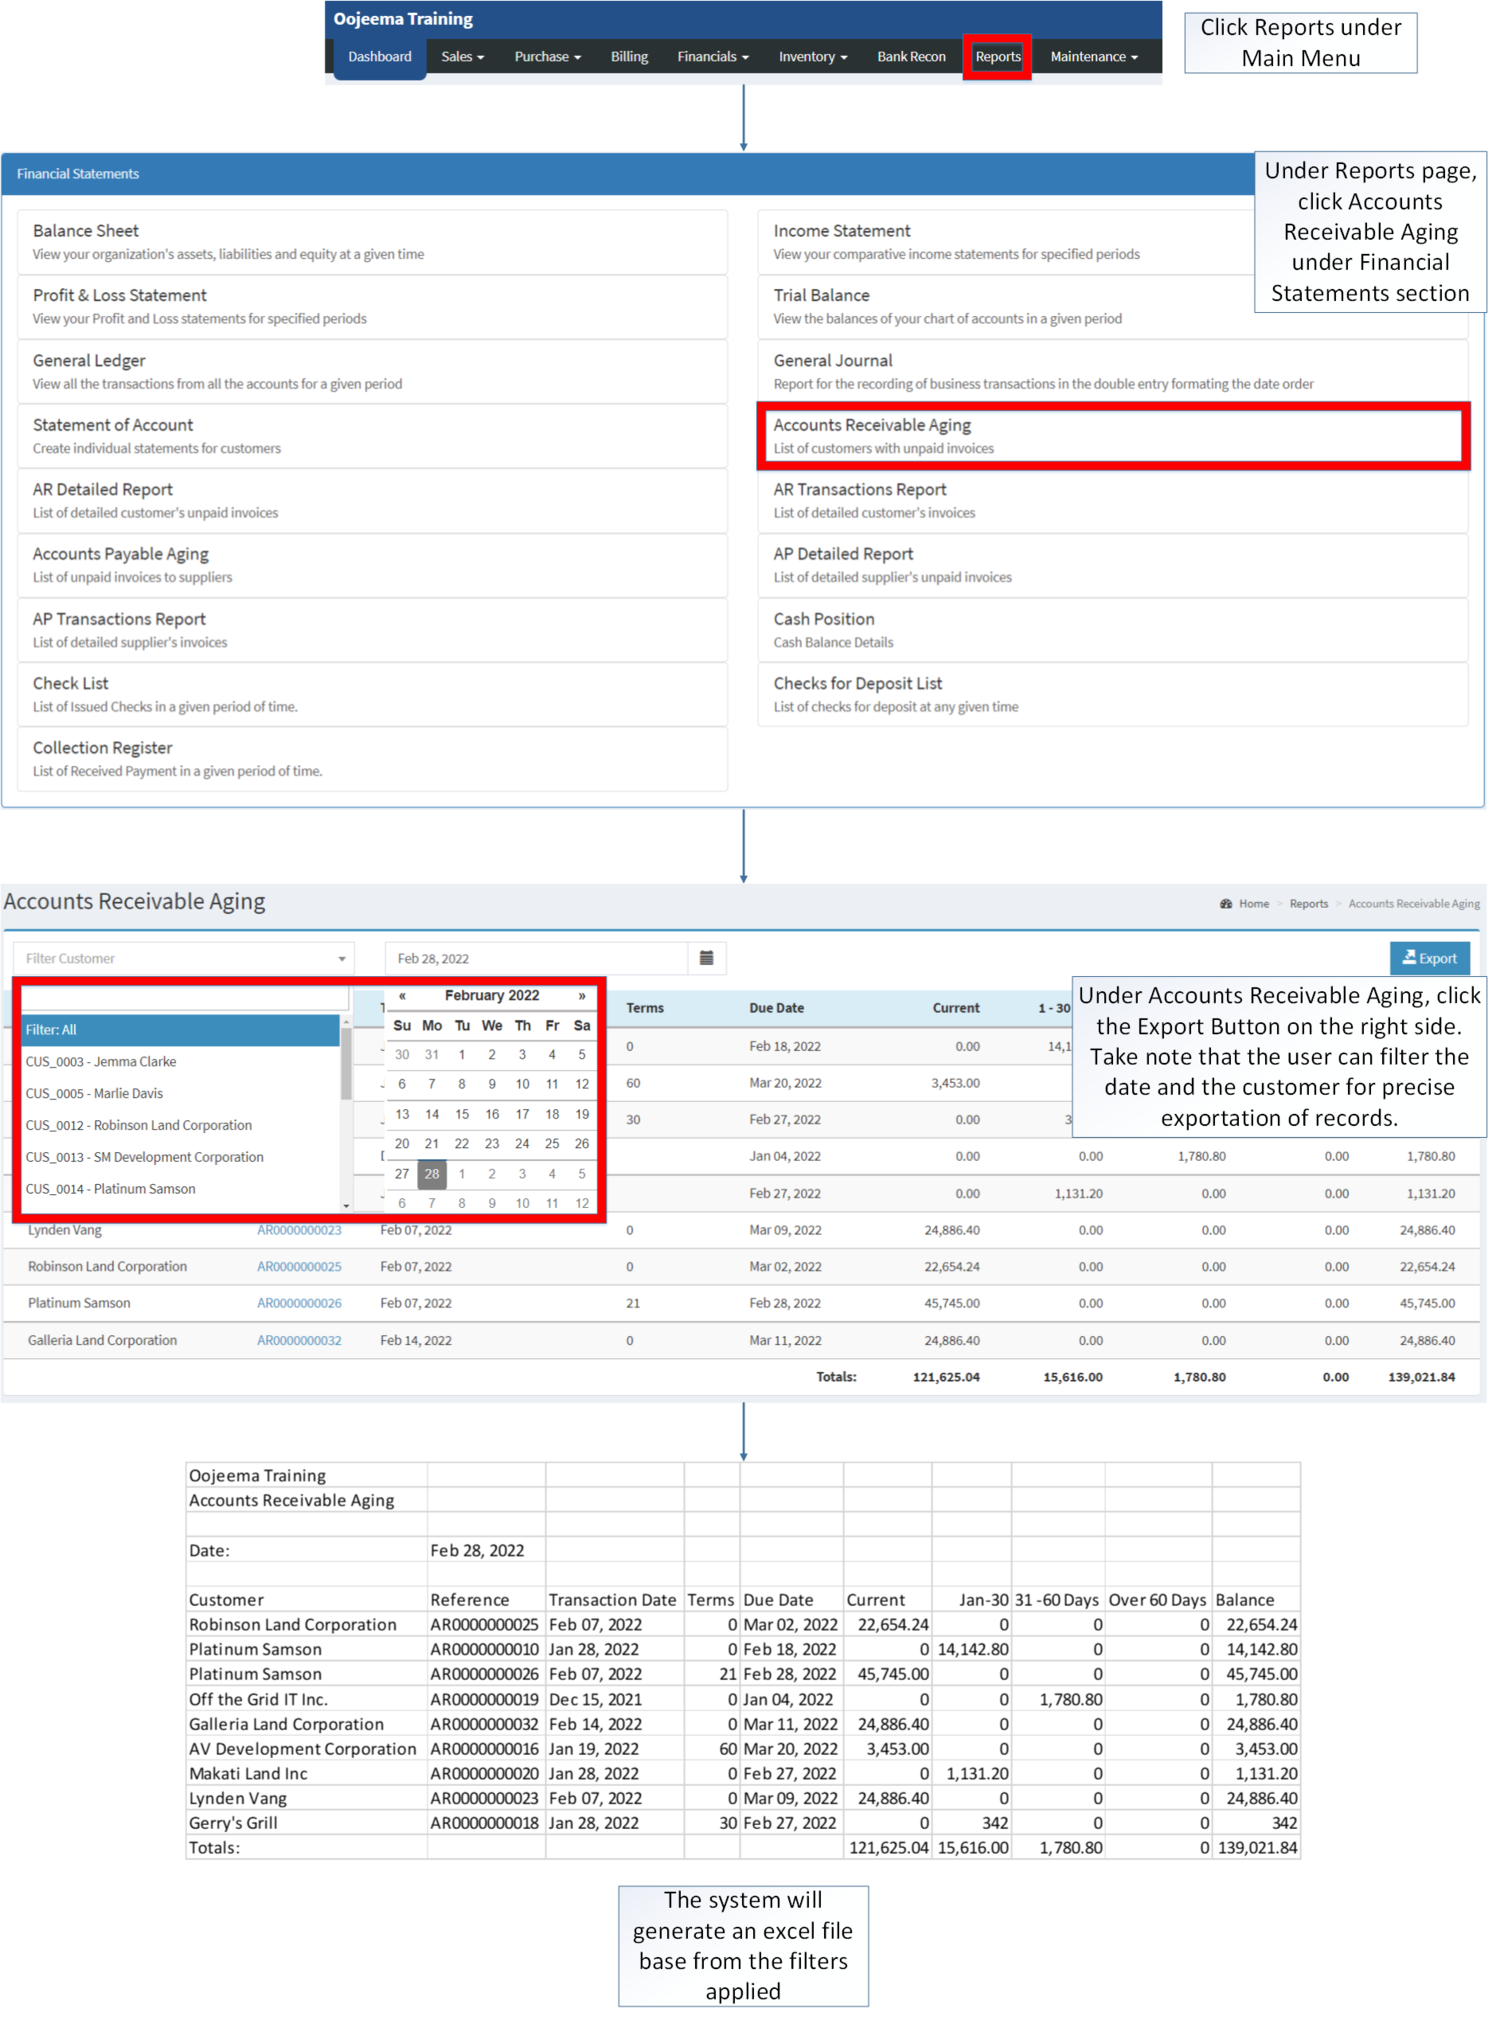 Financial Statement - Accounts Receivable Aging - Export.png